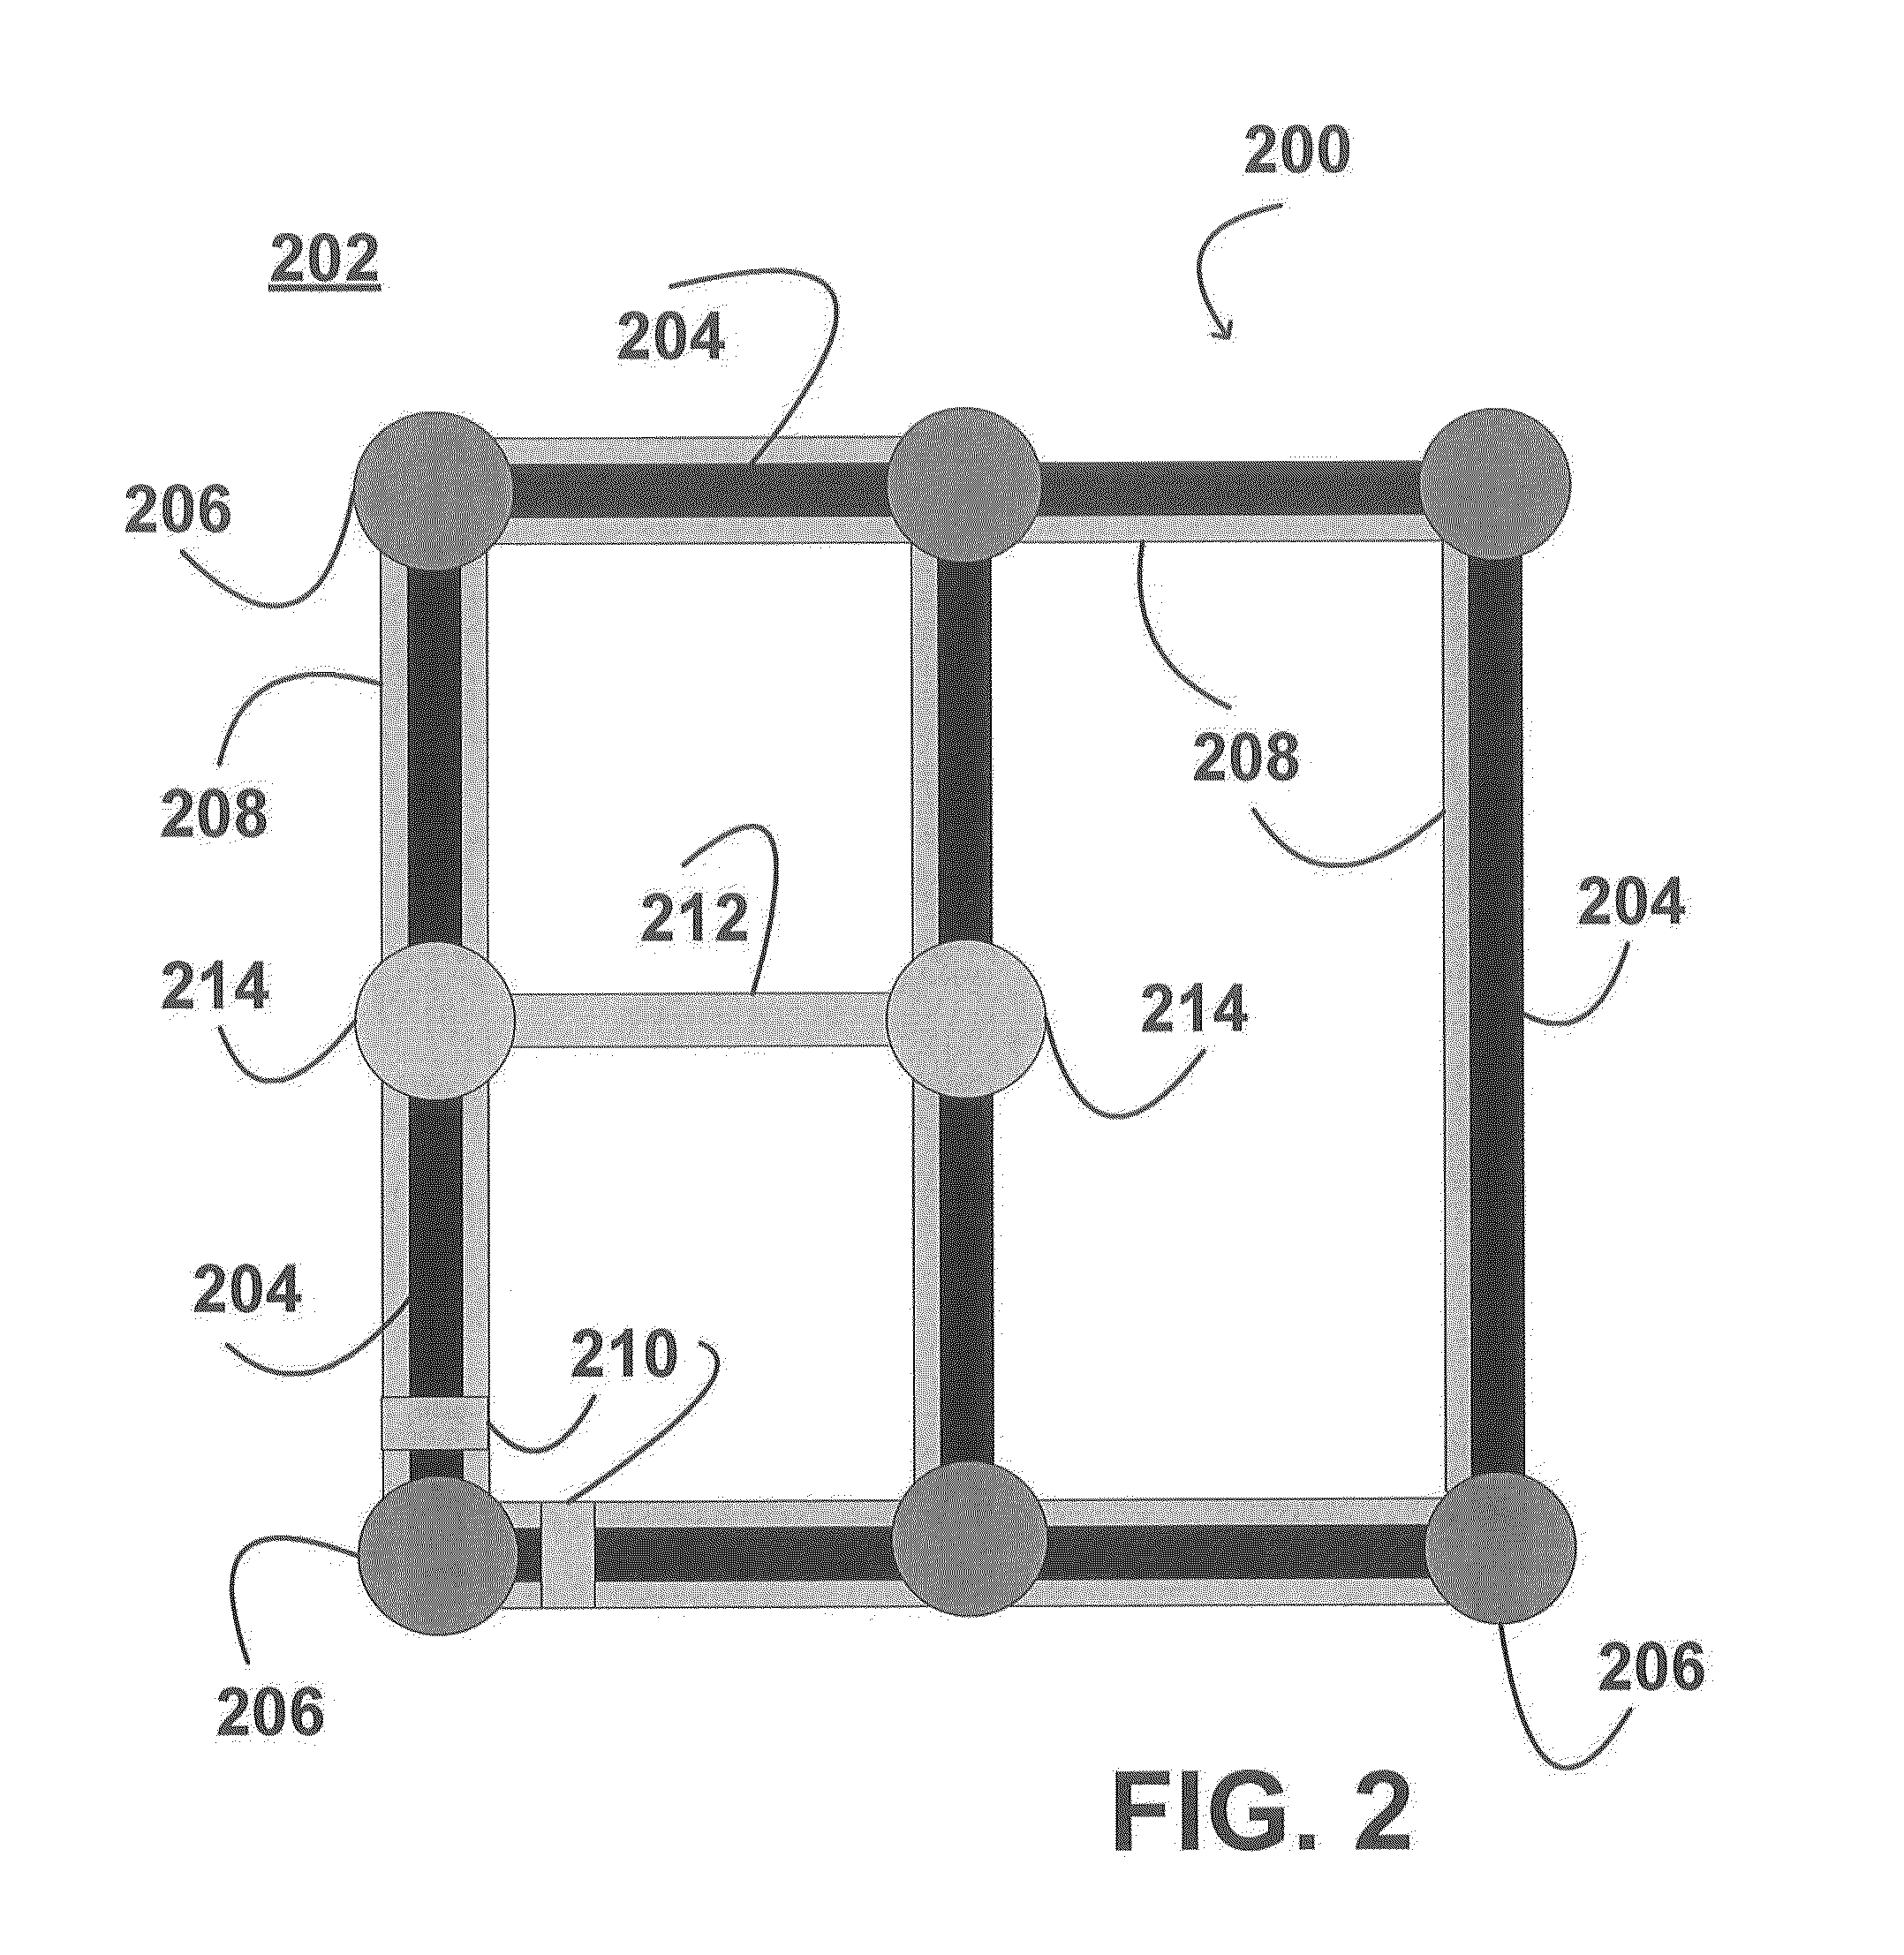 Method of operating a navigation system to provide a pedestrian route